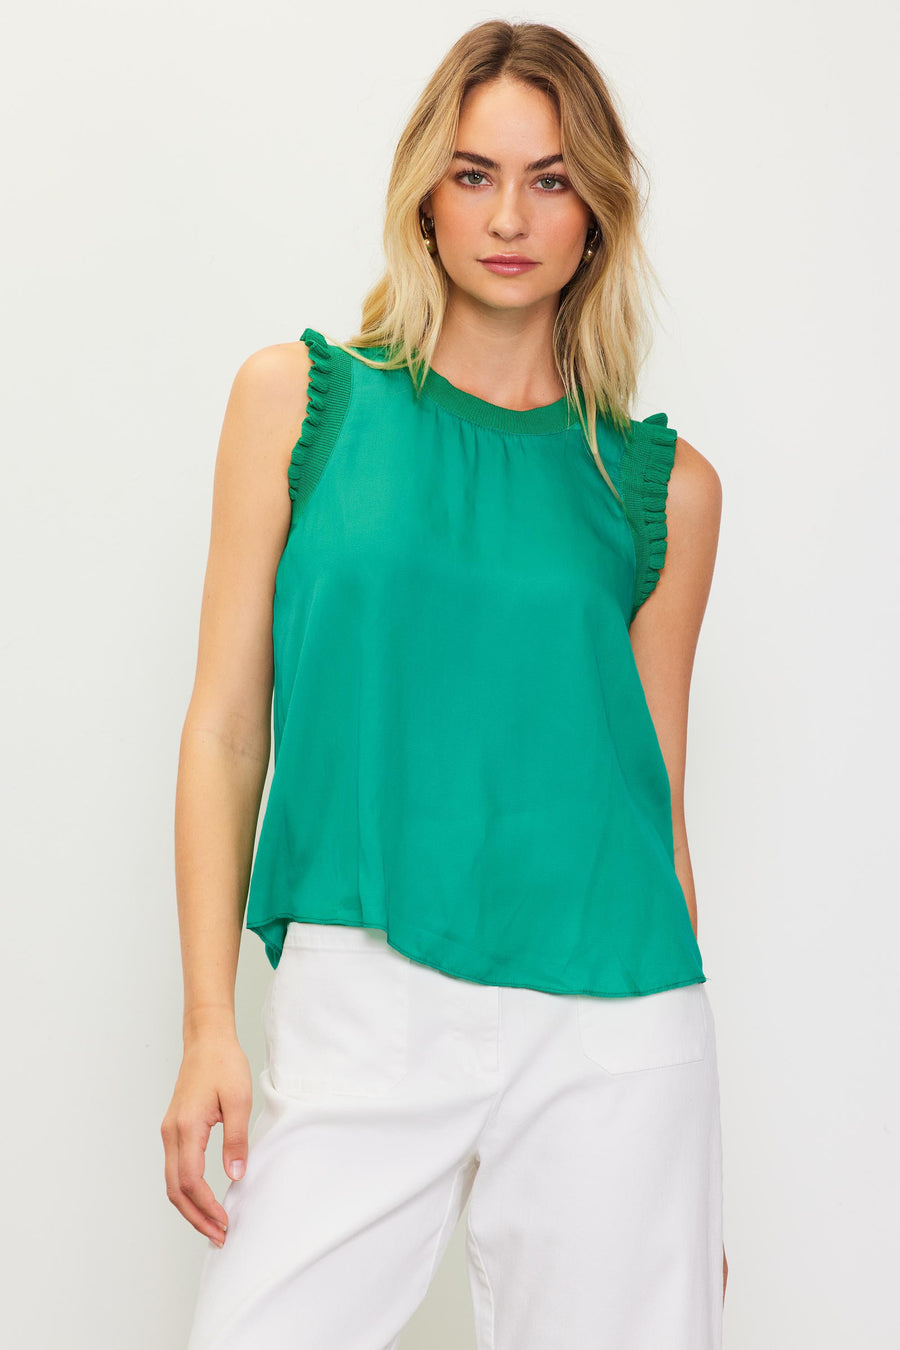 SKIES ARE BLUE Ruffle Contrast Sleeveless Top - Kelly Geen